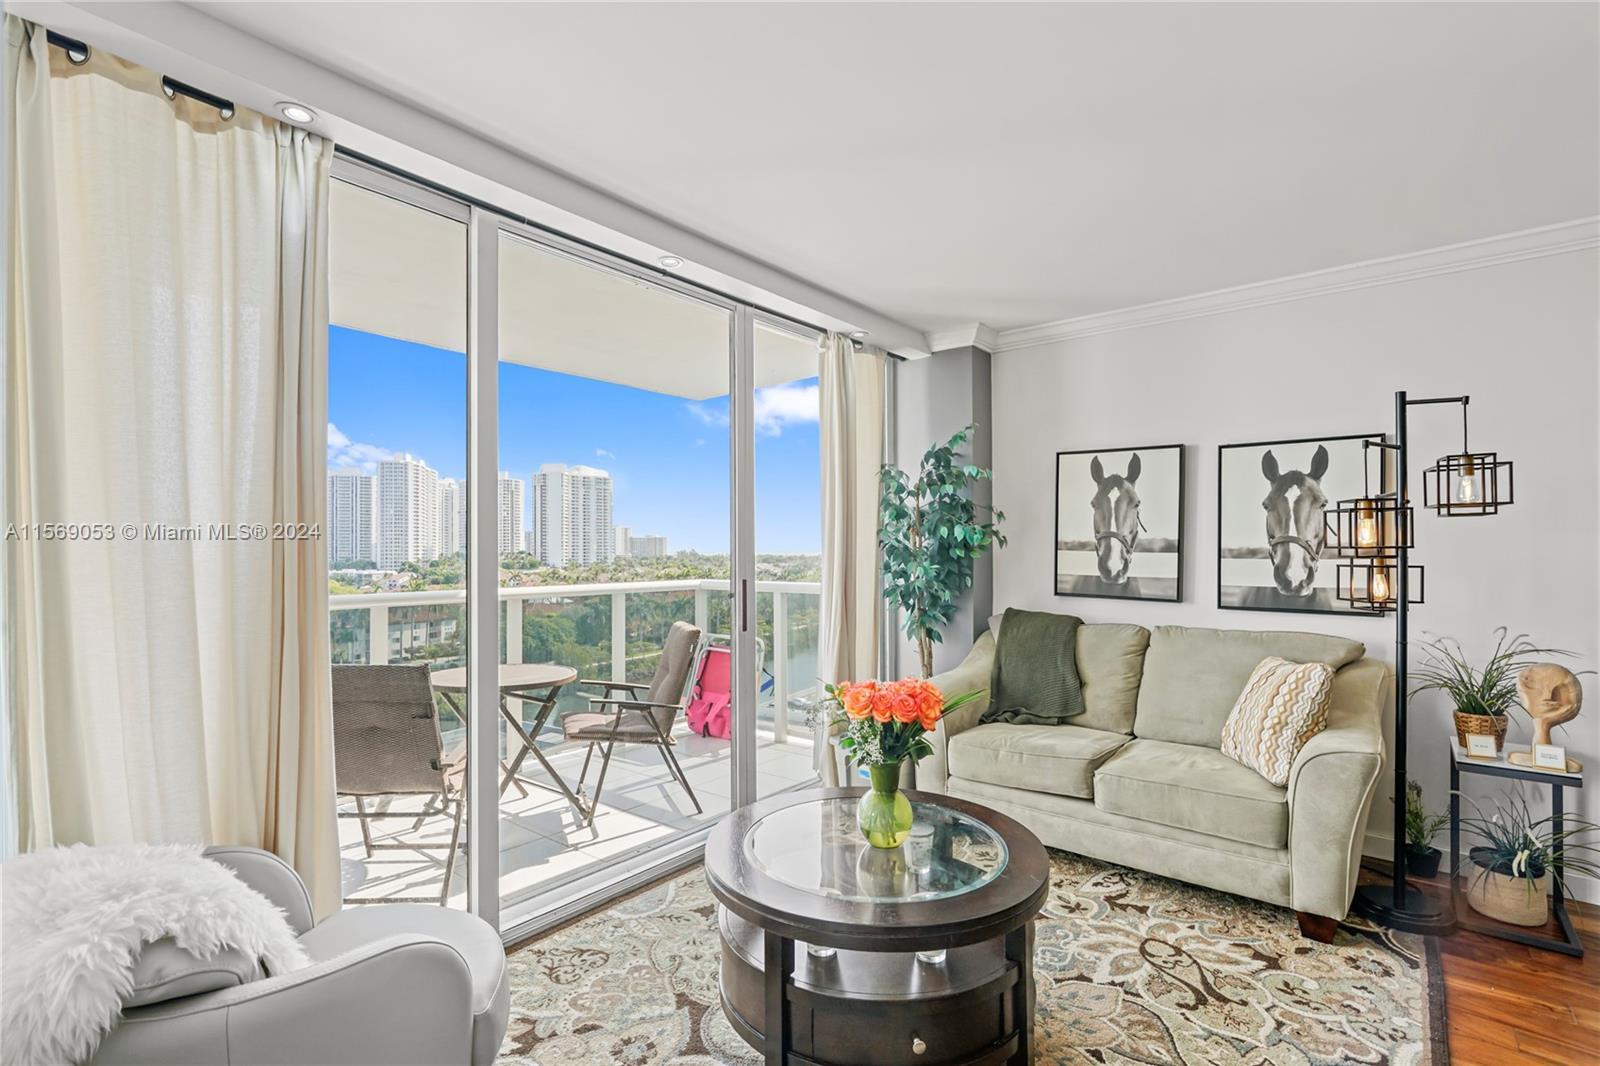 Beautiful & renovated two bedroom condo located along Country Club Dr in the heart of Aventura & nex